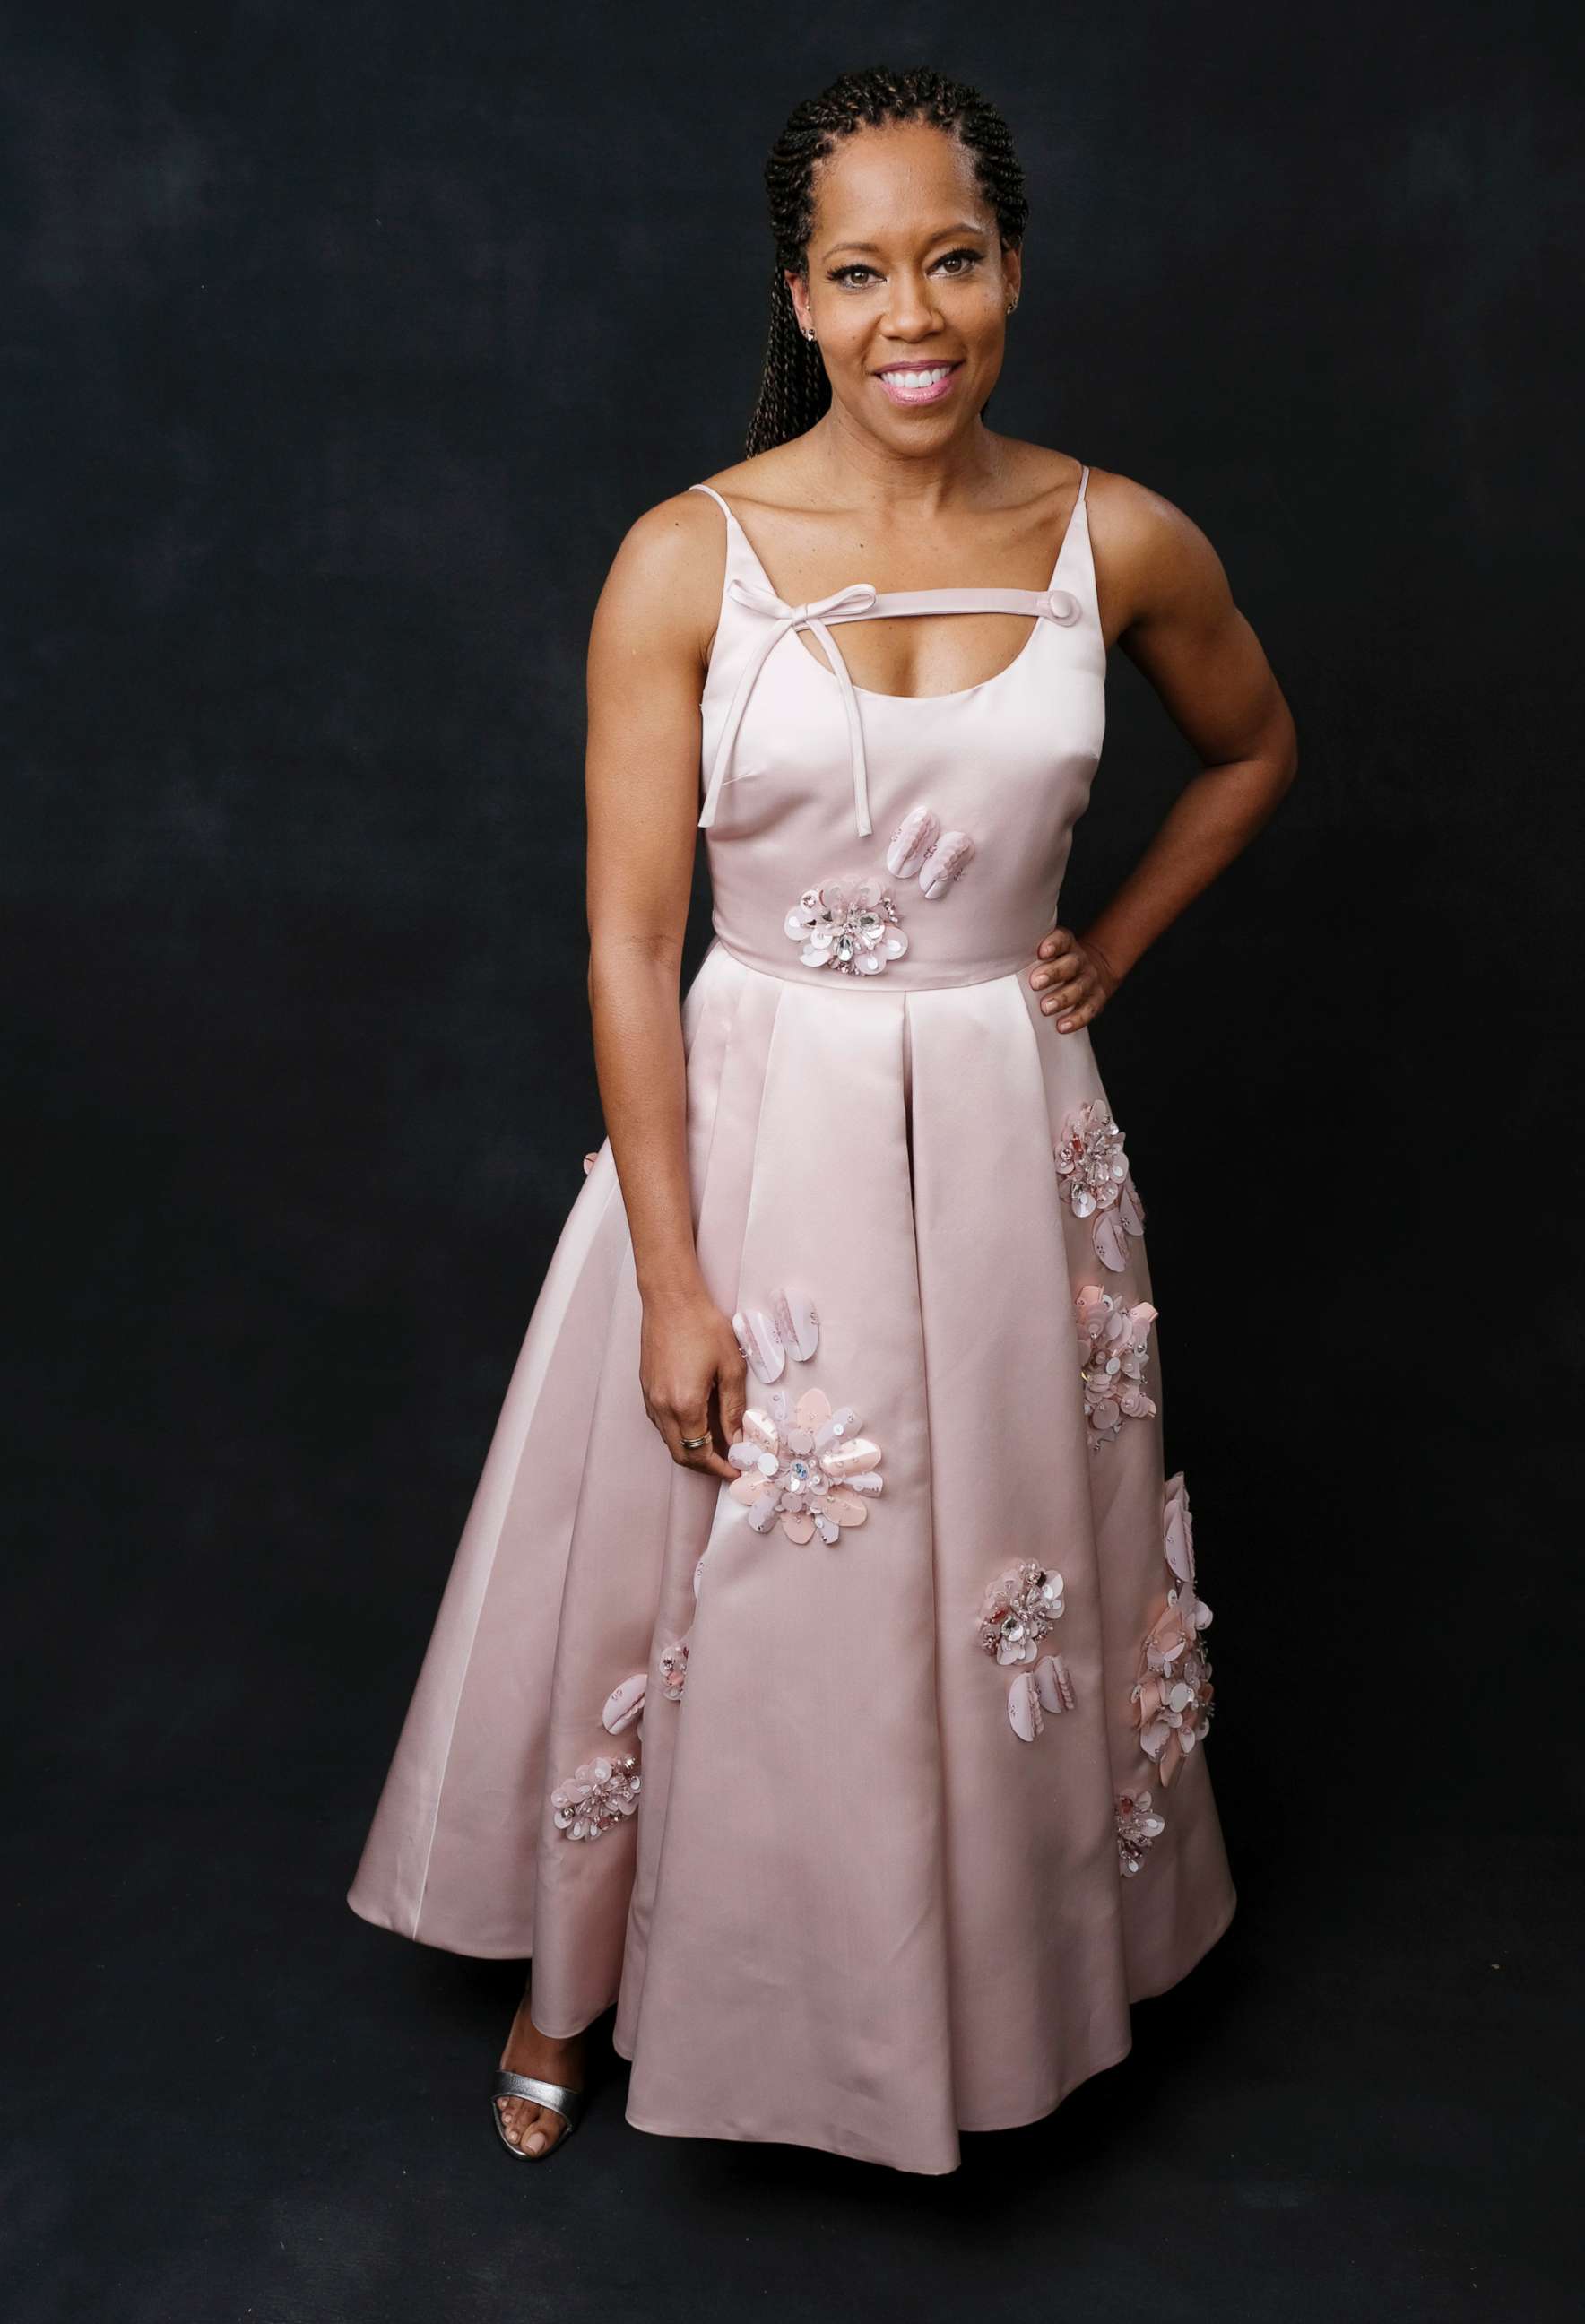 PHOTO: Regina King poses for a portrait at the 91st Academy Awards Nominees Luncheon at The Beverly Hilton Hotel, Feb. 4, 2019, in Beverly Hills, Calif.